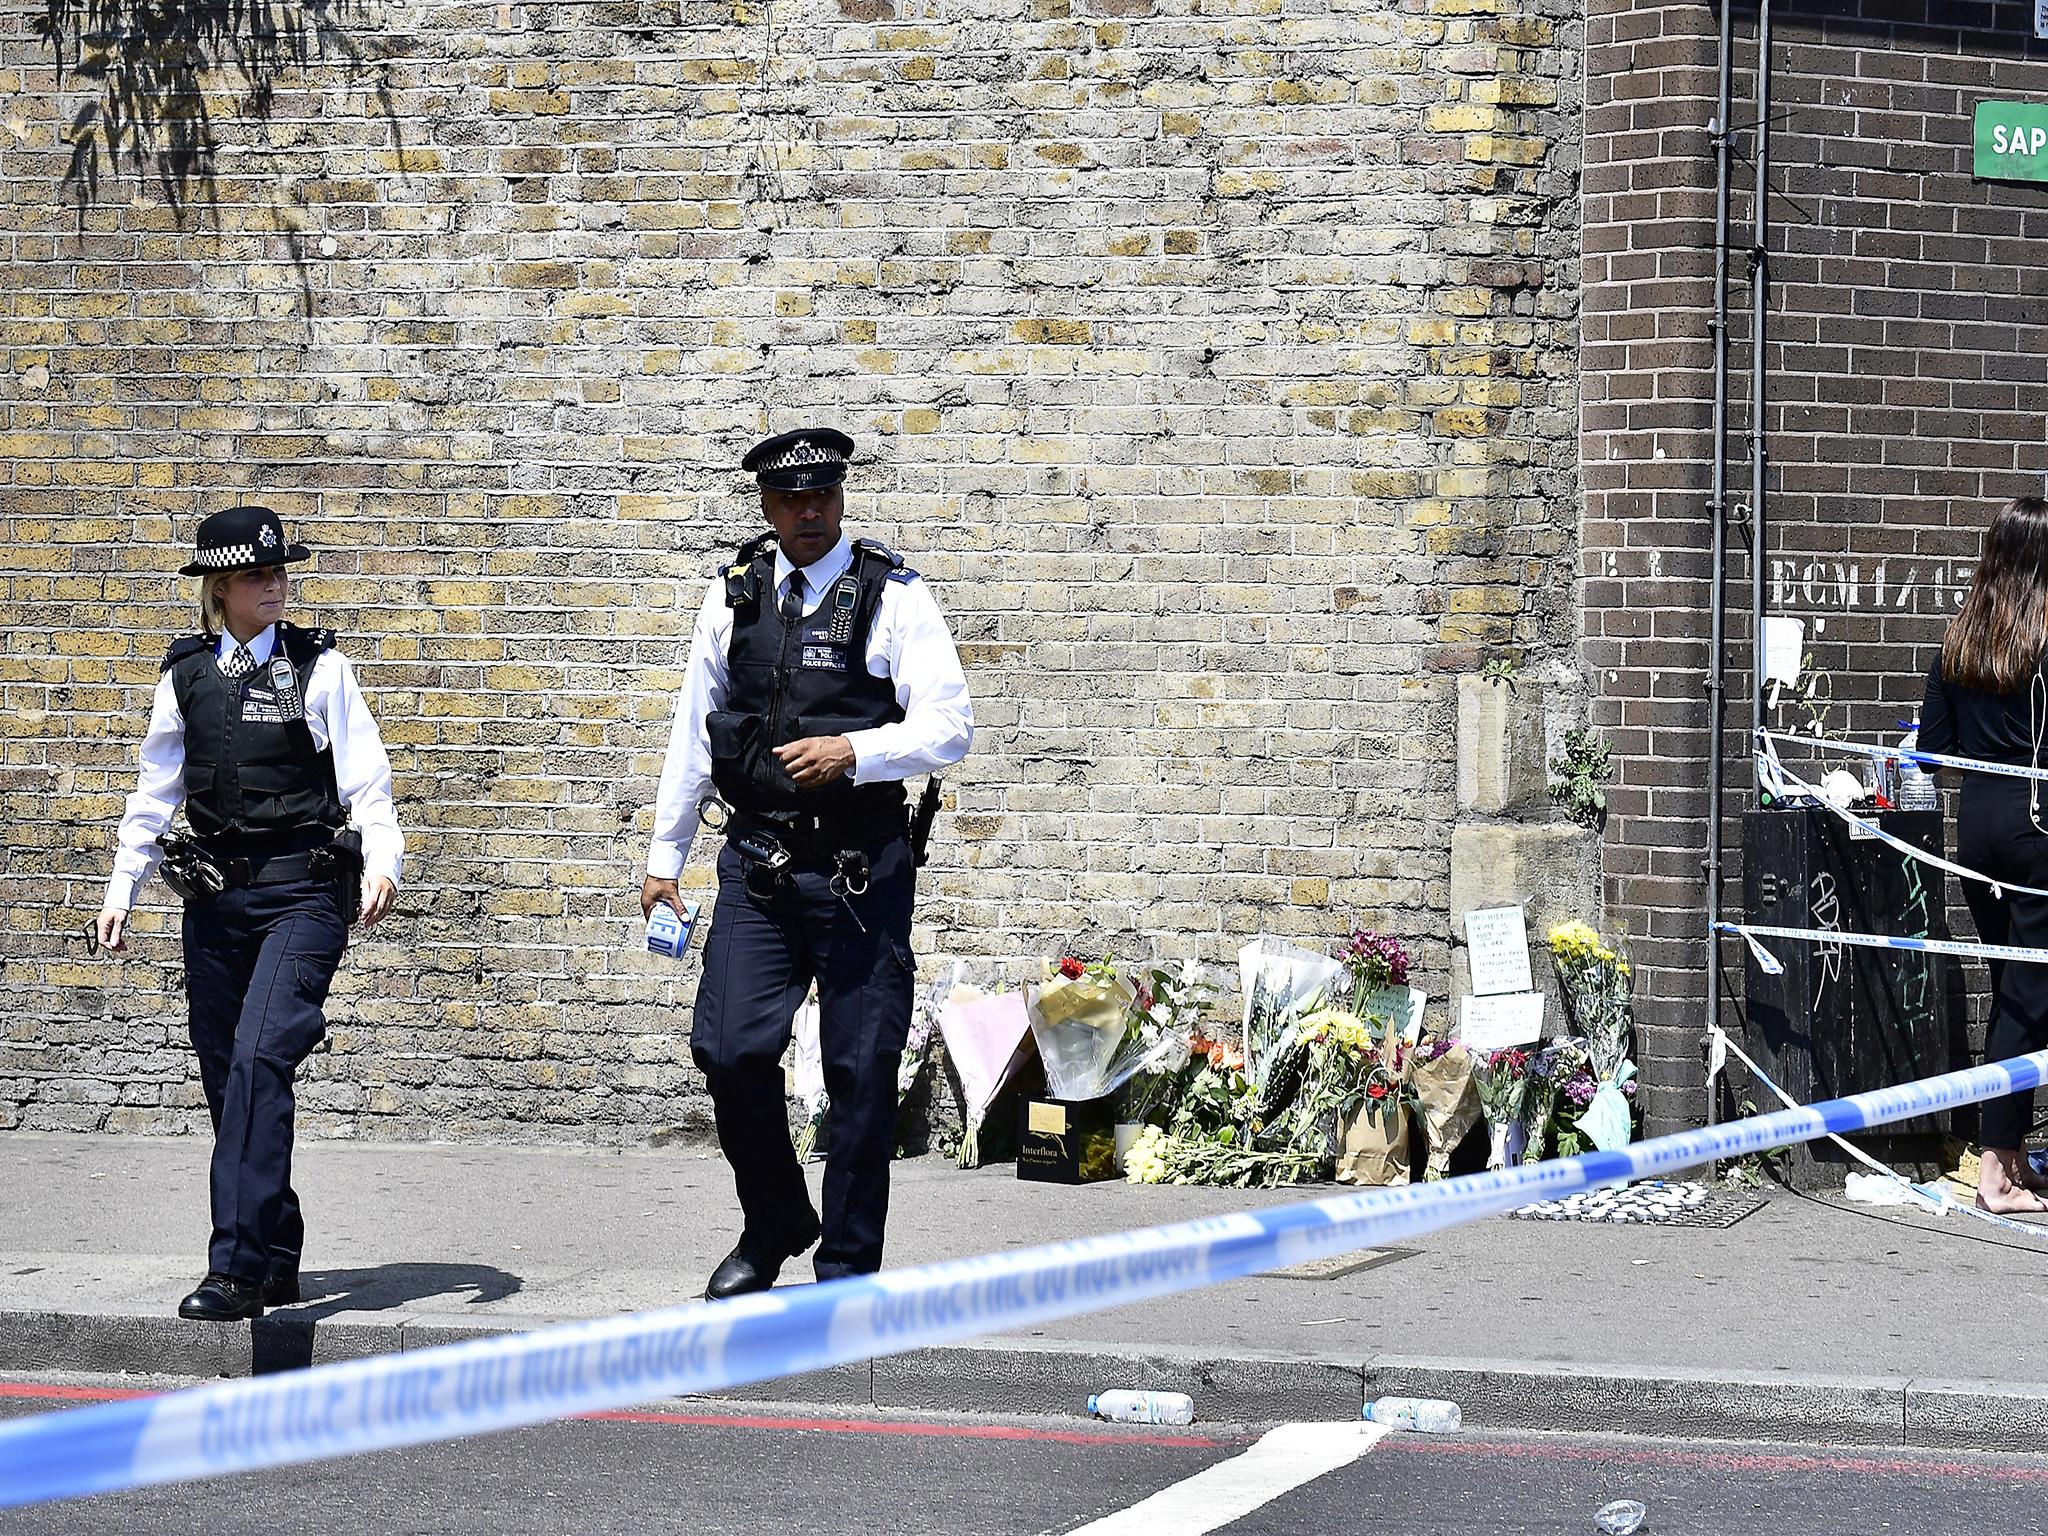 Metropolitan Police at the scene of the Finsbury Park attack